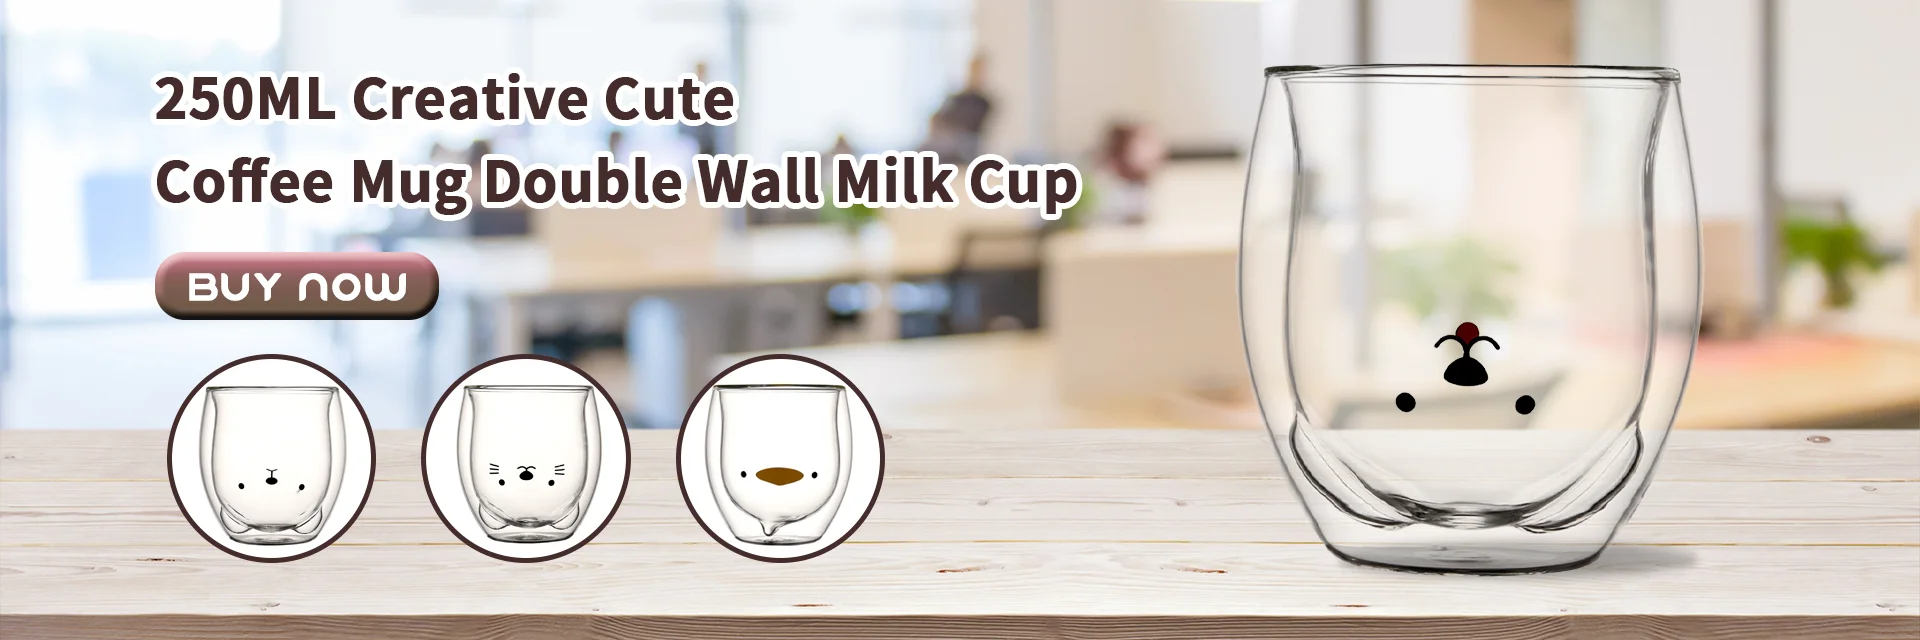 Lily Anne Boutique Cute Glass Drinking Cups - Cat, Duck, Dog,  or Bear Double Wall Glass Cup - Use as a Glass Coffee Cup, Tea Cup,  Cocktail Cup, or Milk